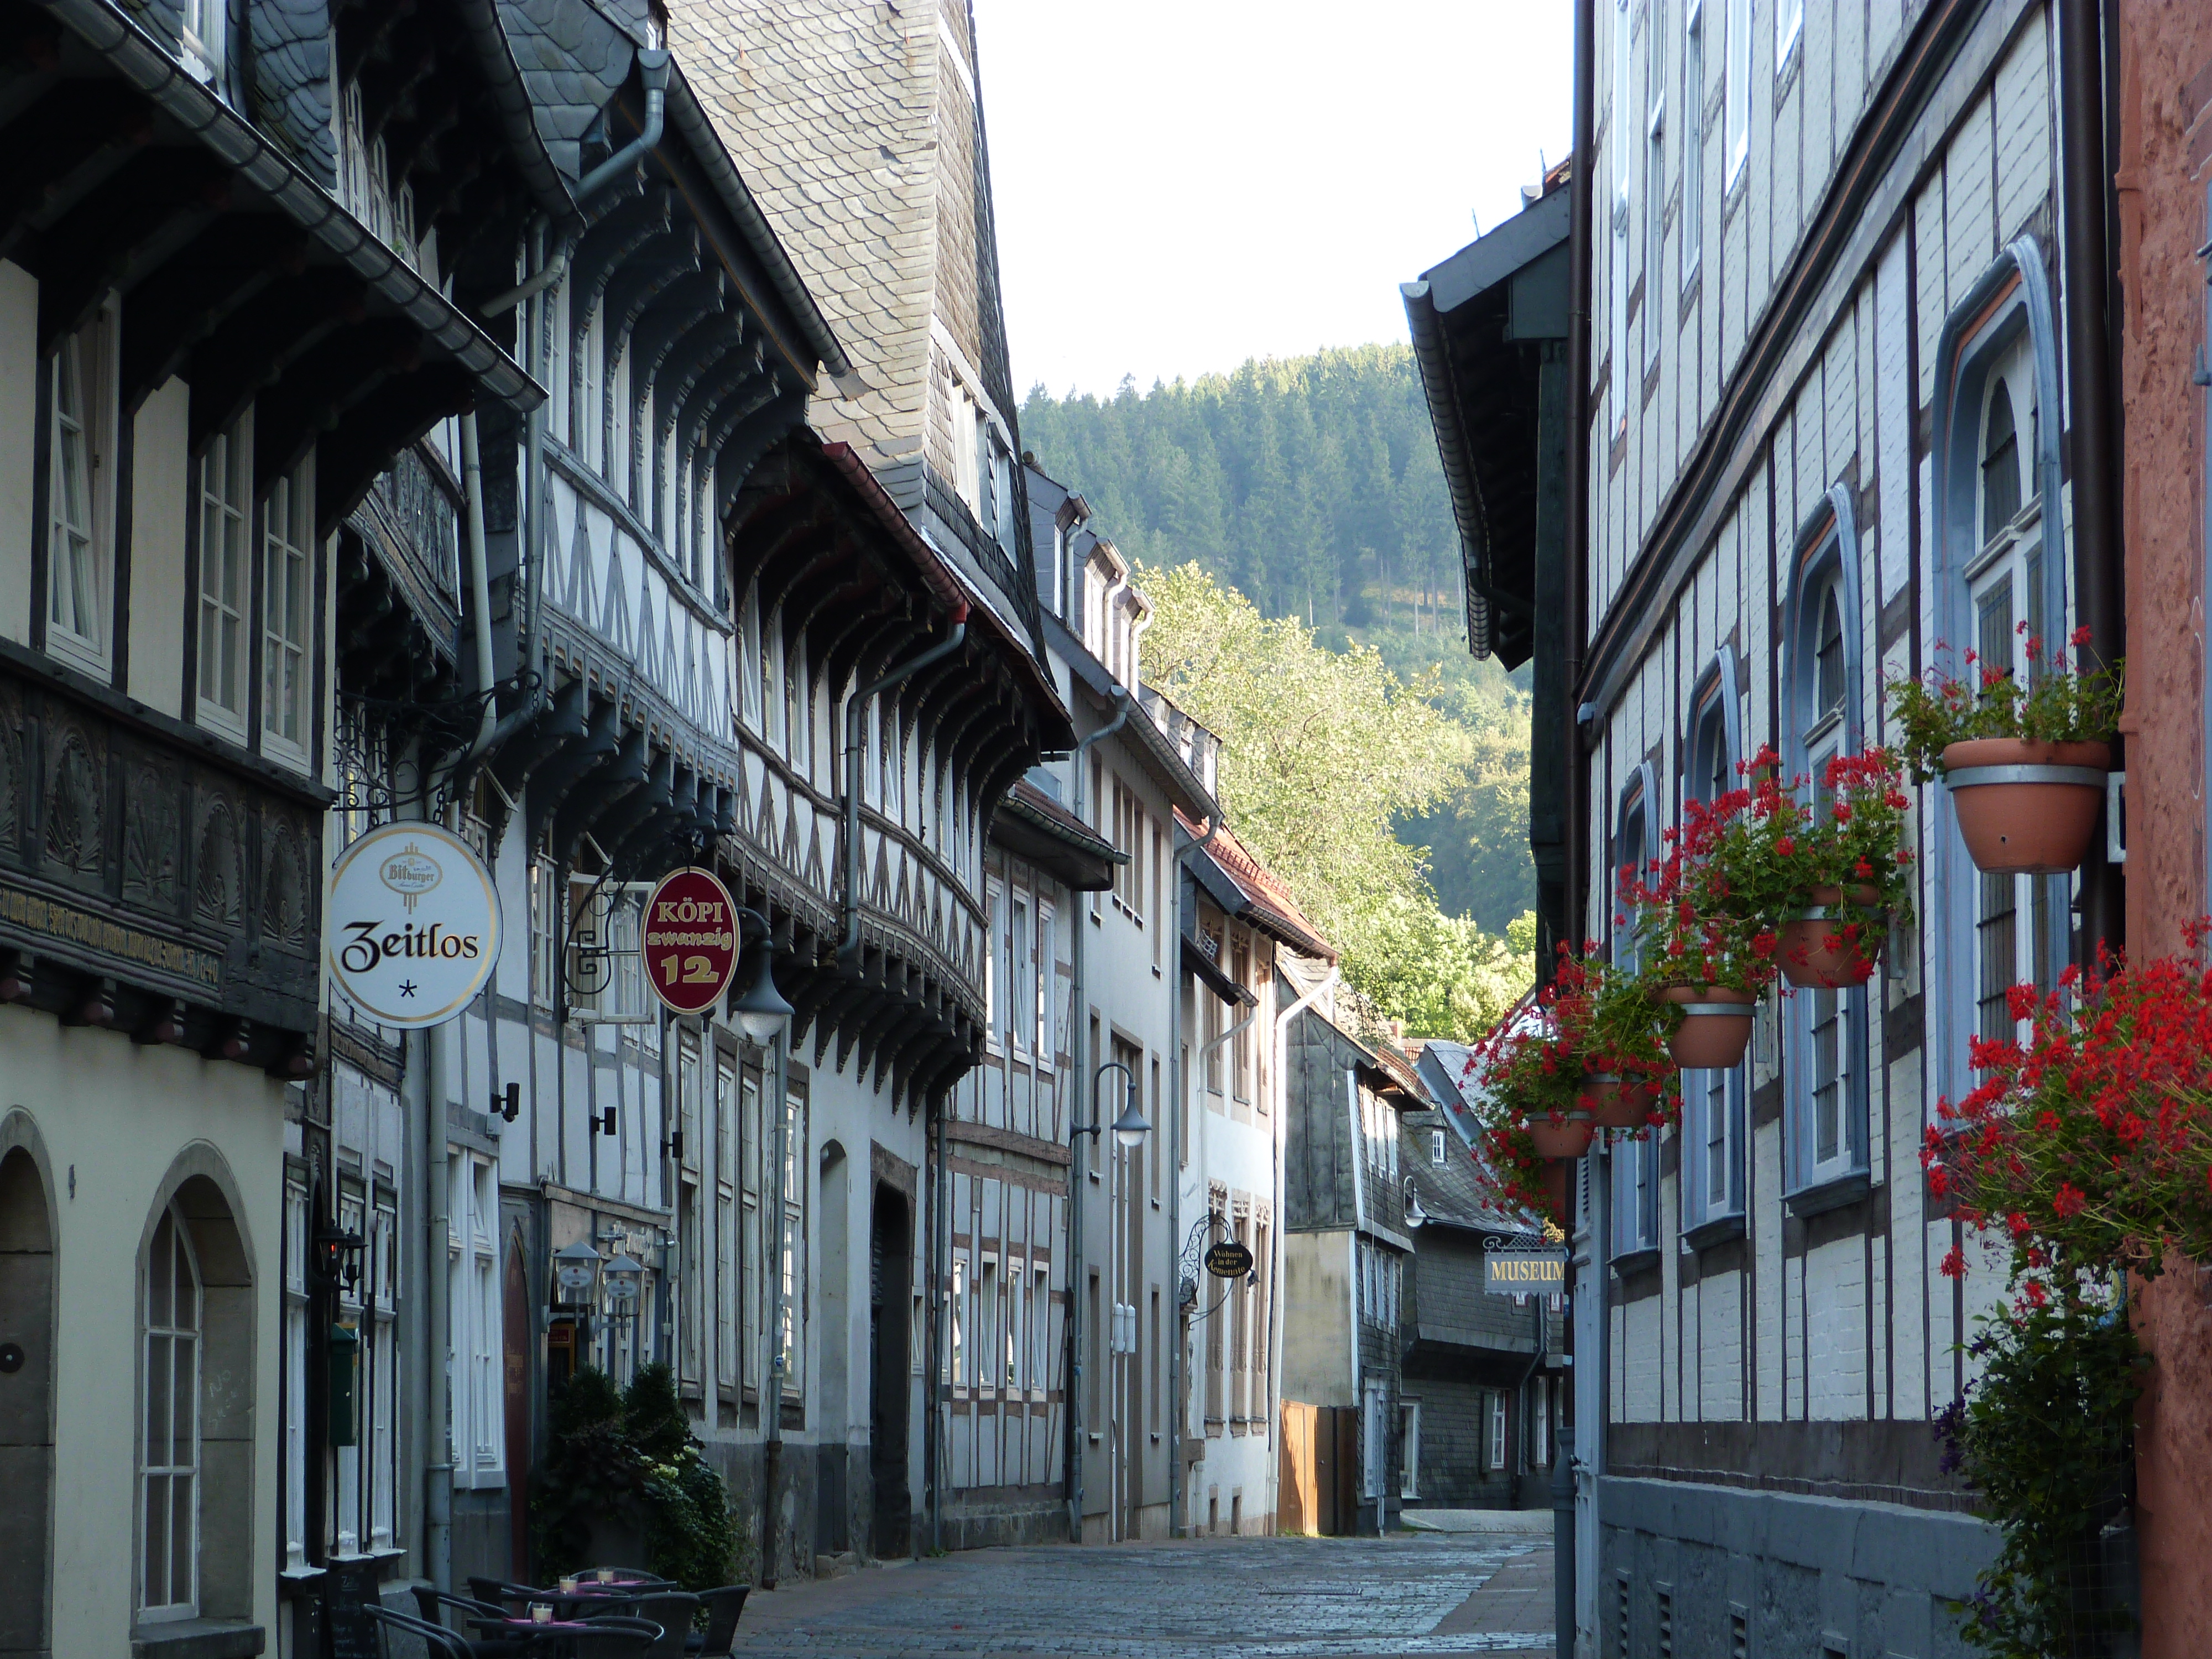 The half-timbered houses of Goslar